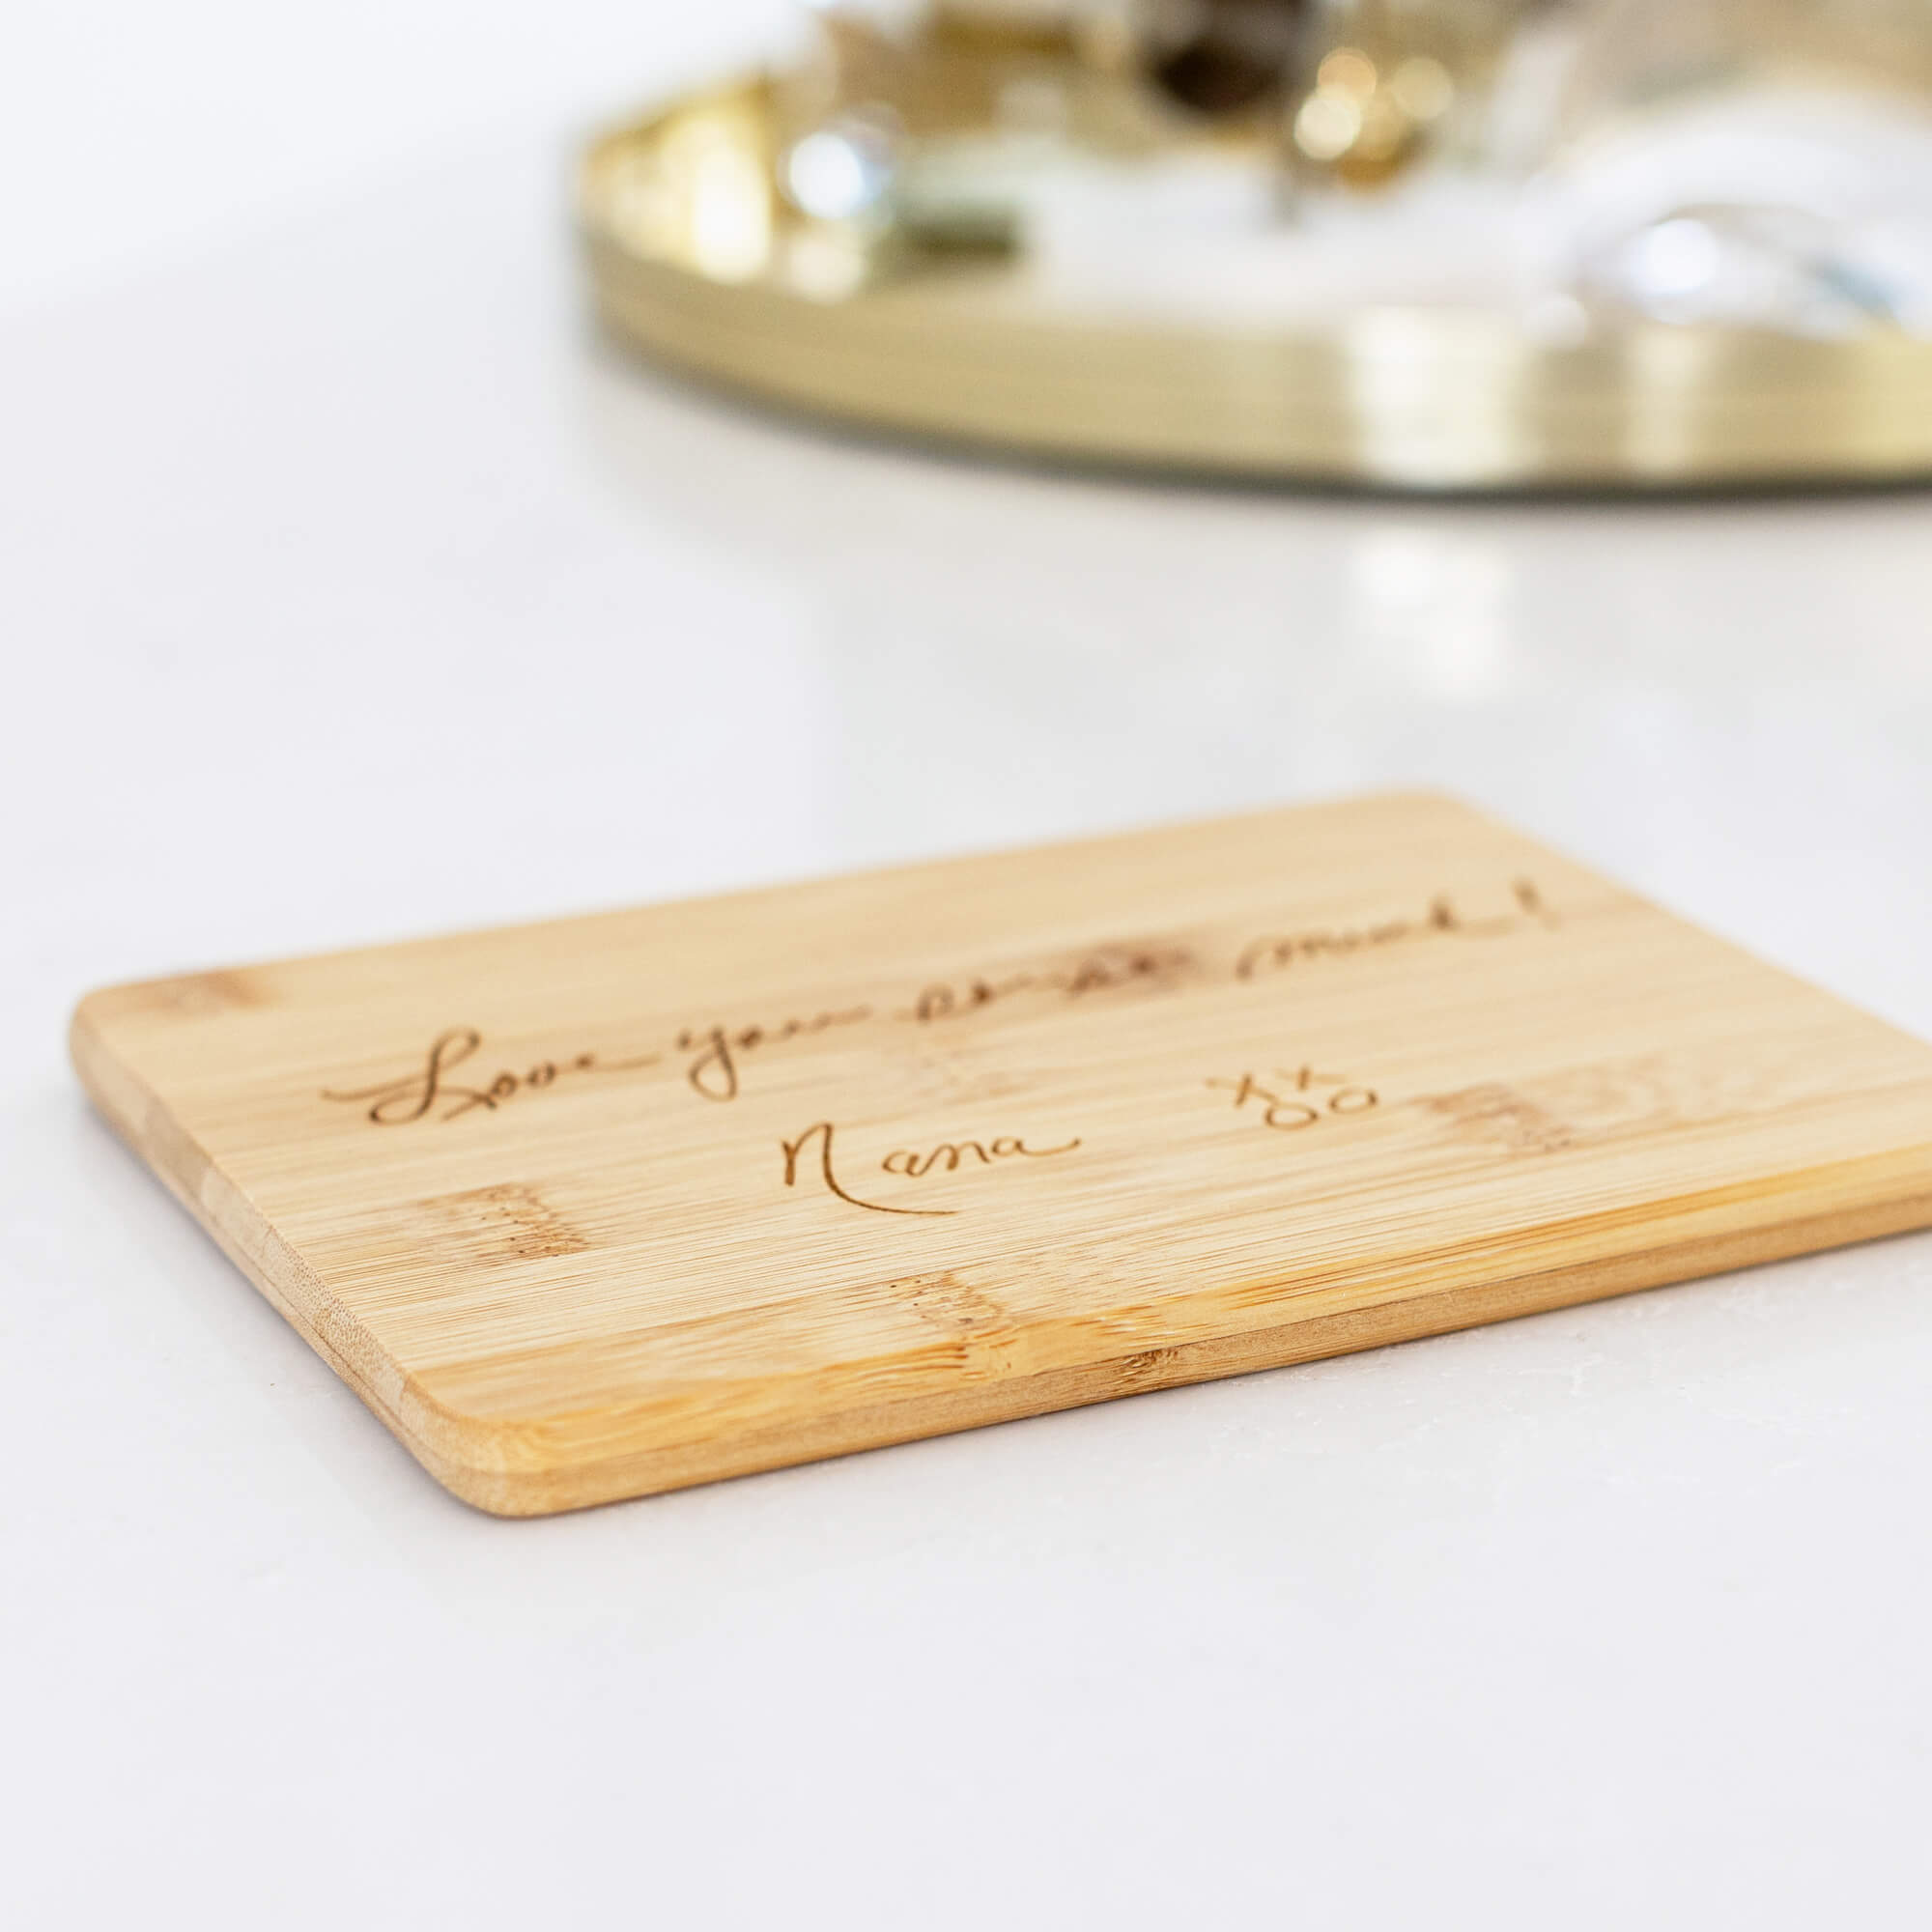 Bamboo Bar Board Engraved with Handwriting - 6 x 8 inches